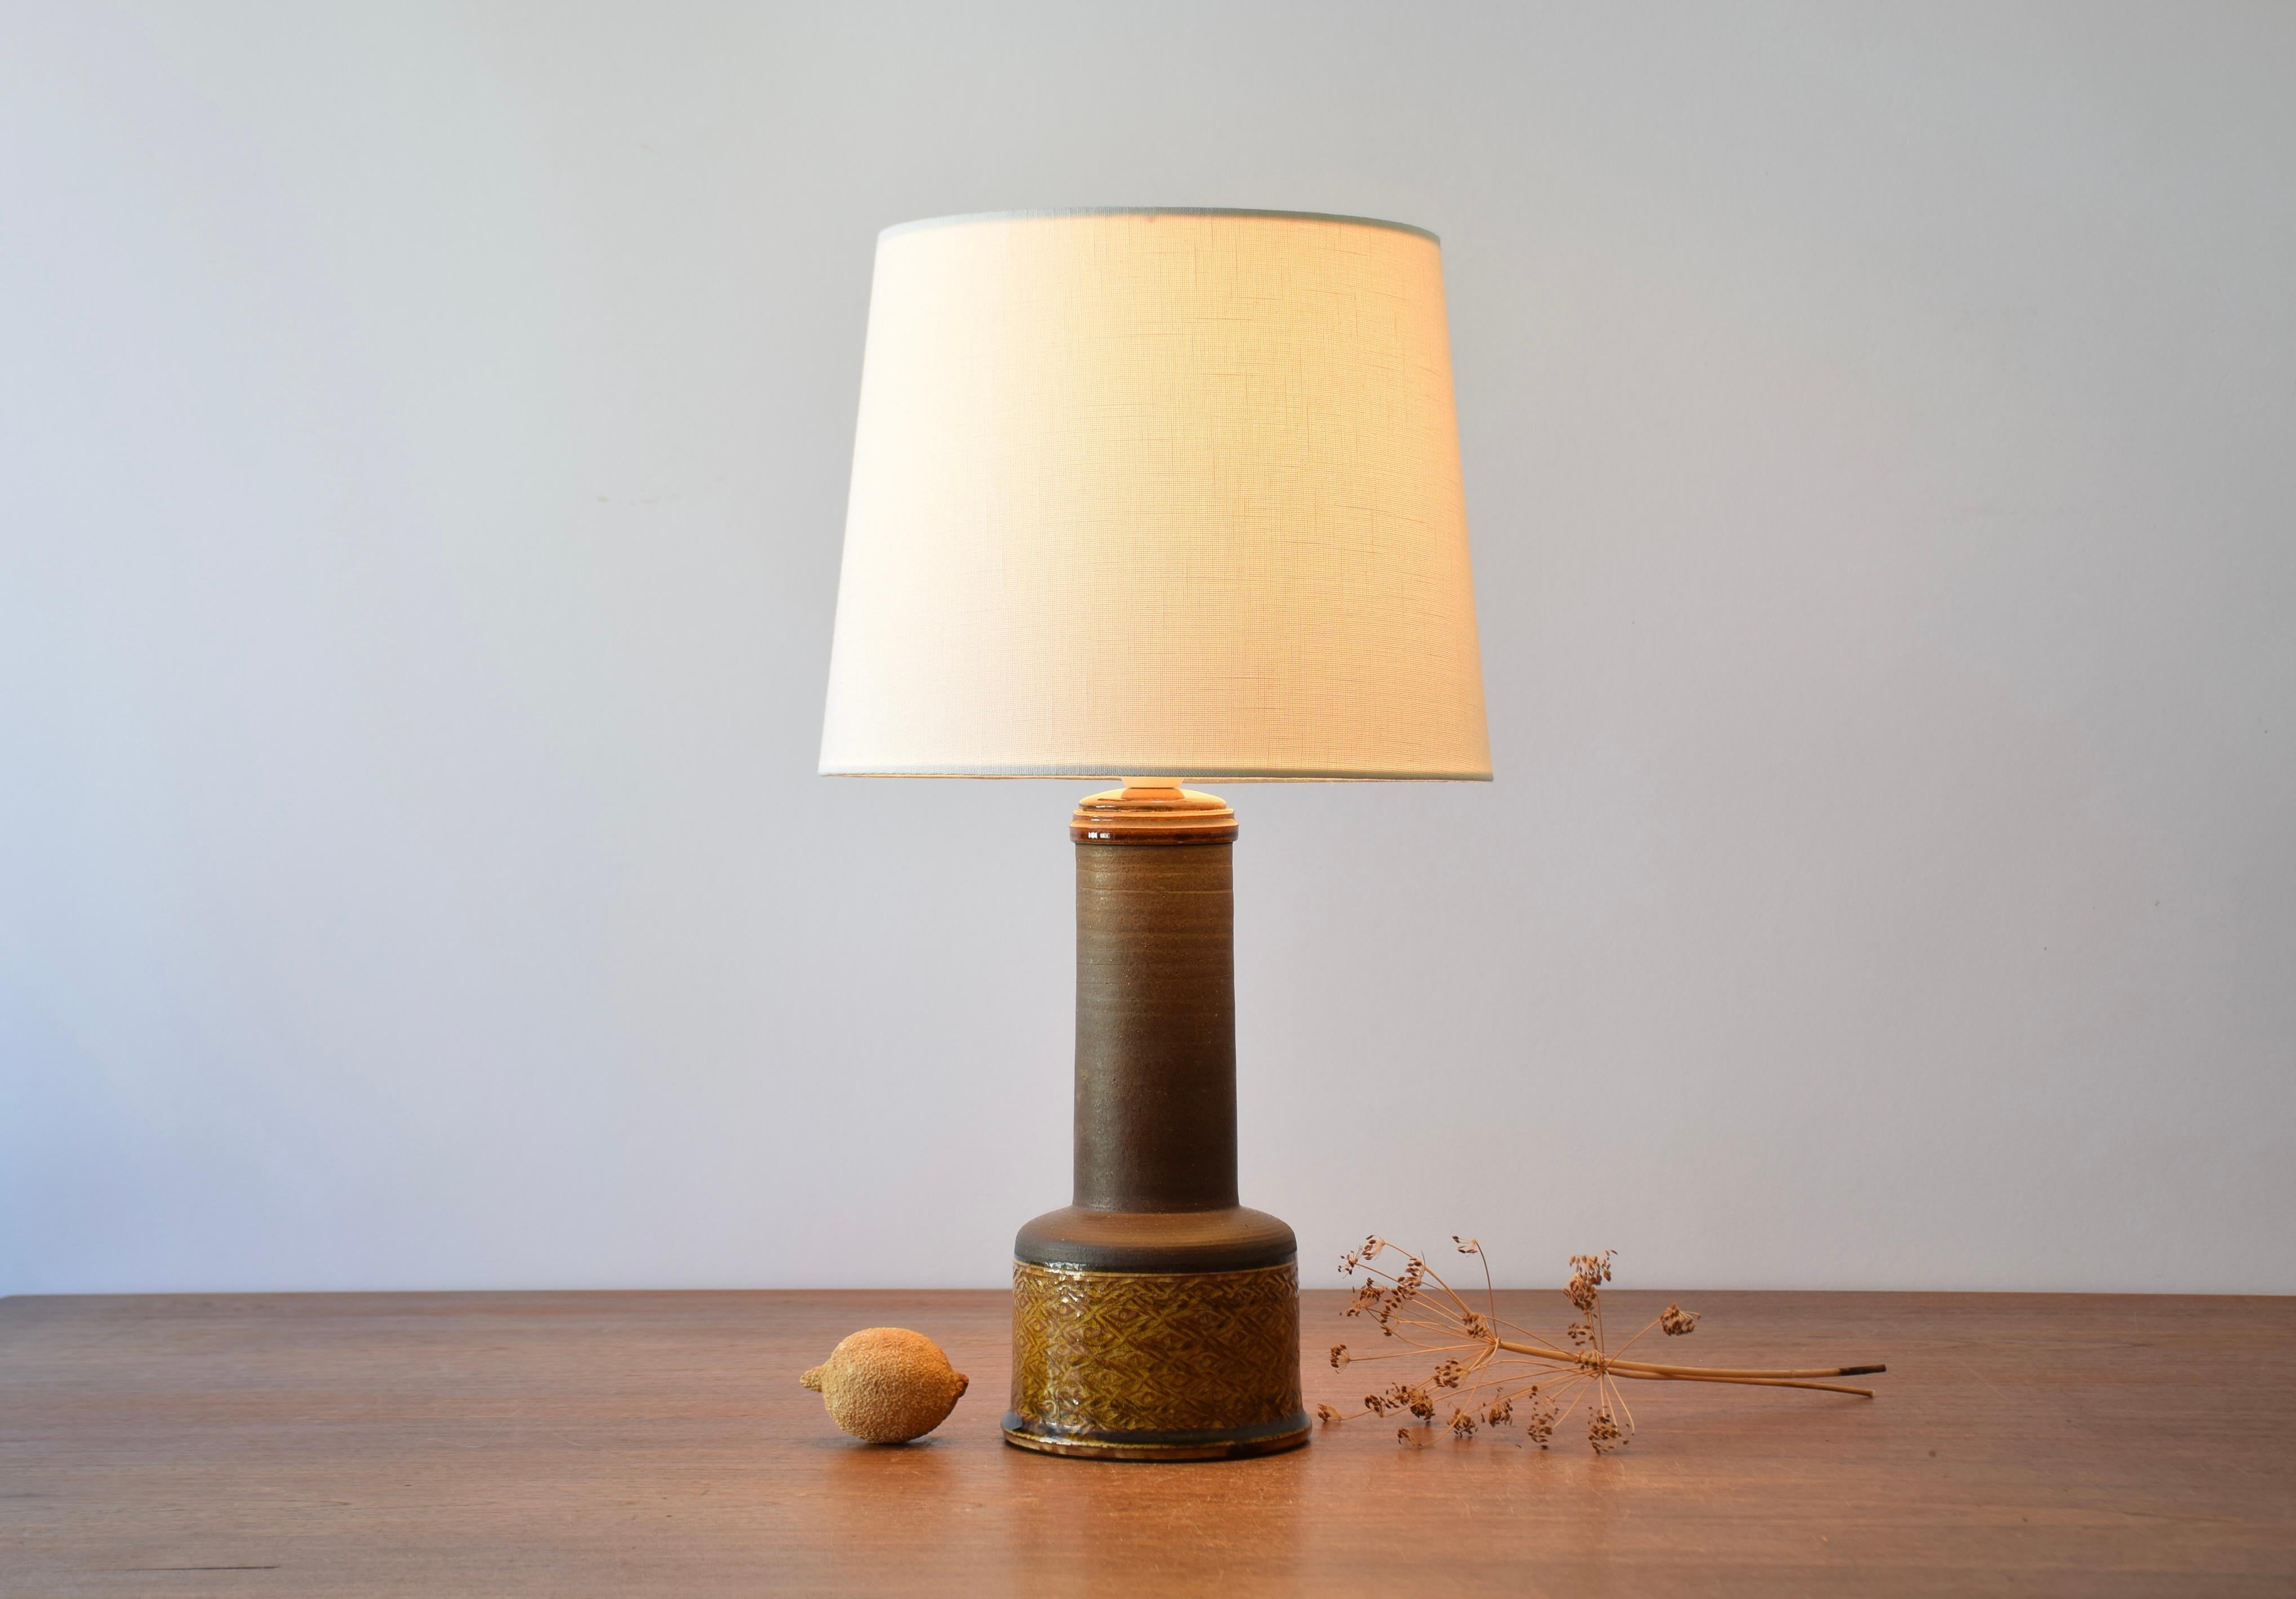 Table lamp from Herman August Kähler's ceramic workshop in Denmark. Made ca 1960s. The design is attributed to Nils Kähler.

The lamp base has an incised pattern and the glossy glaze is amber / curry colored. The neck and the shoulders are left